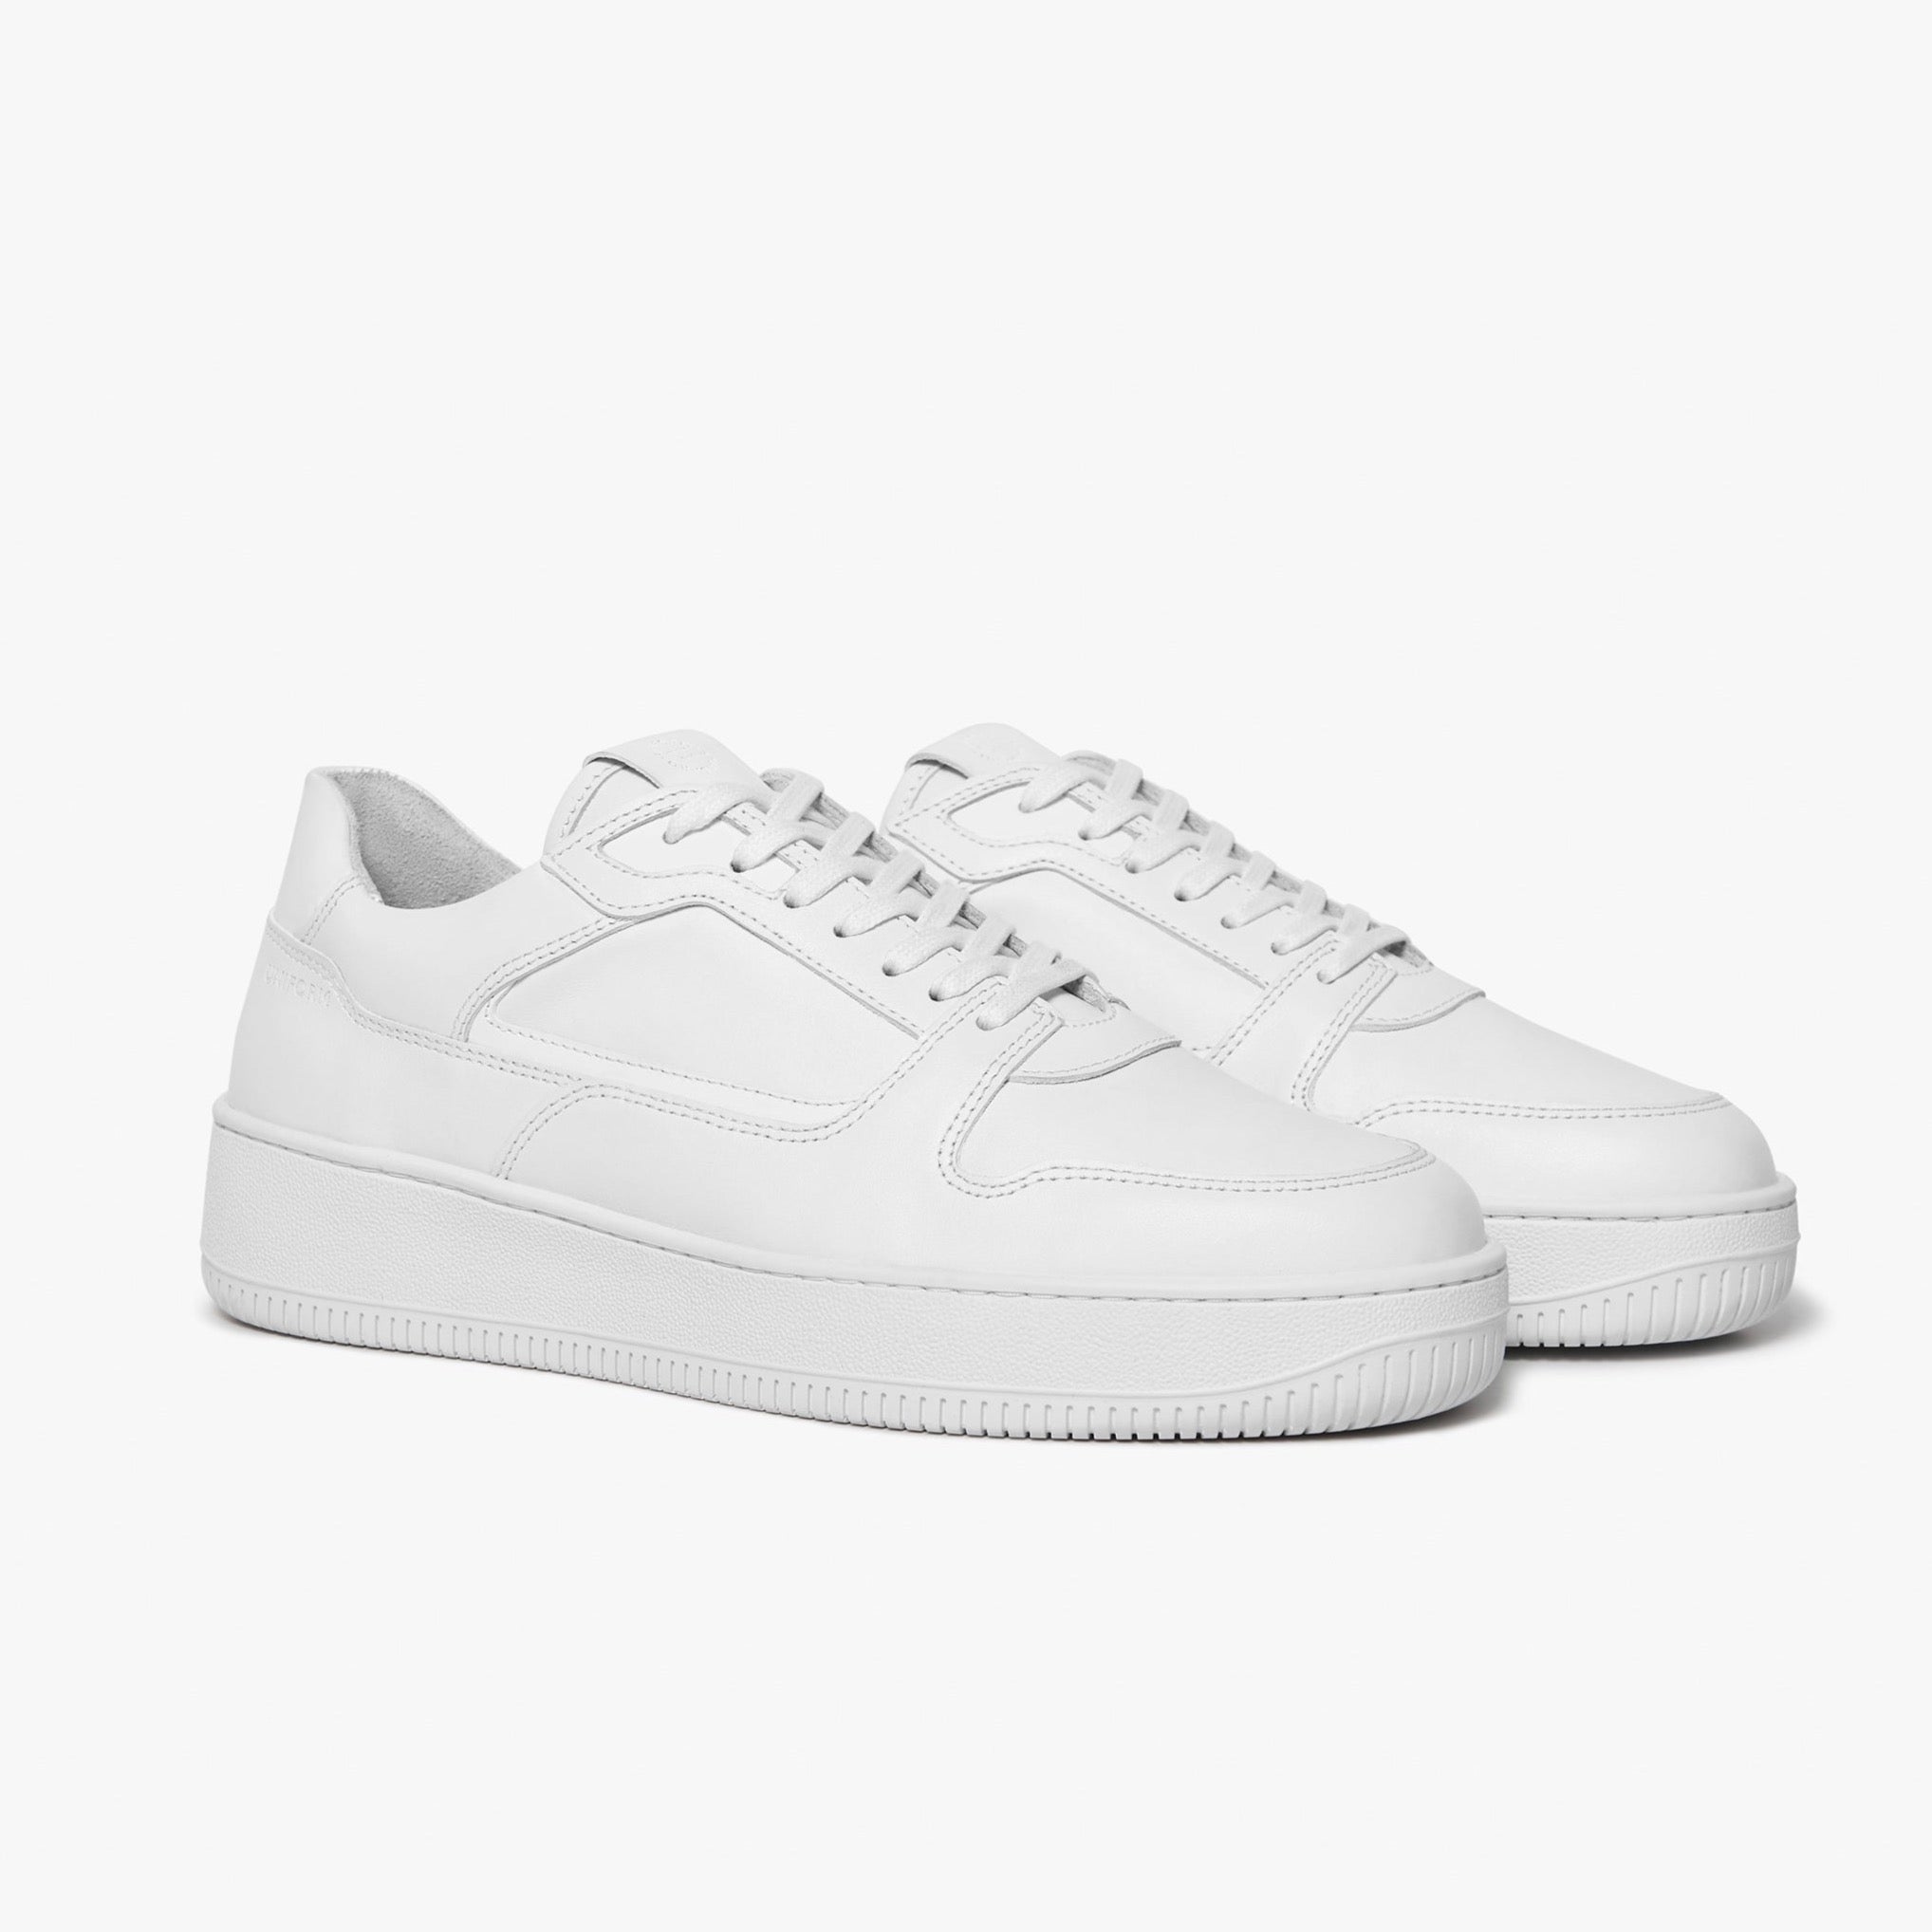 Series 5 Triple White Leather Womens